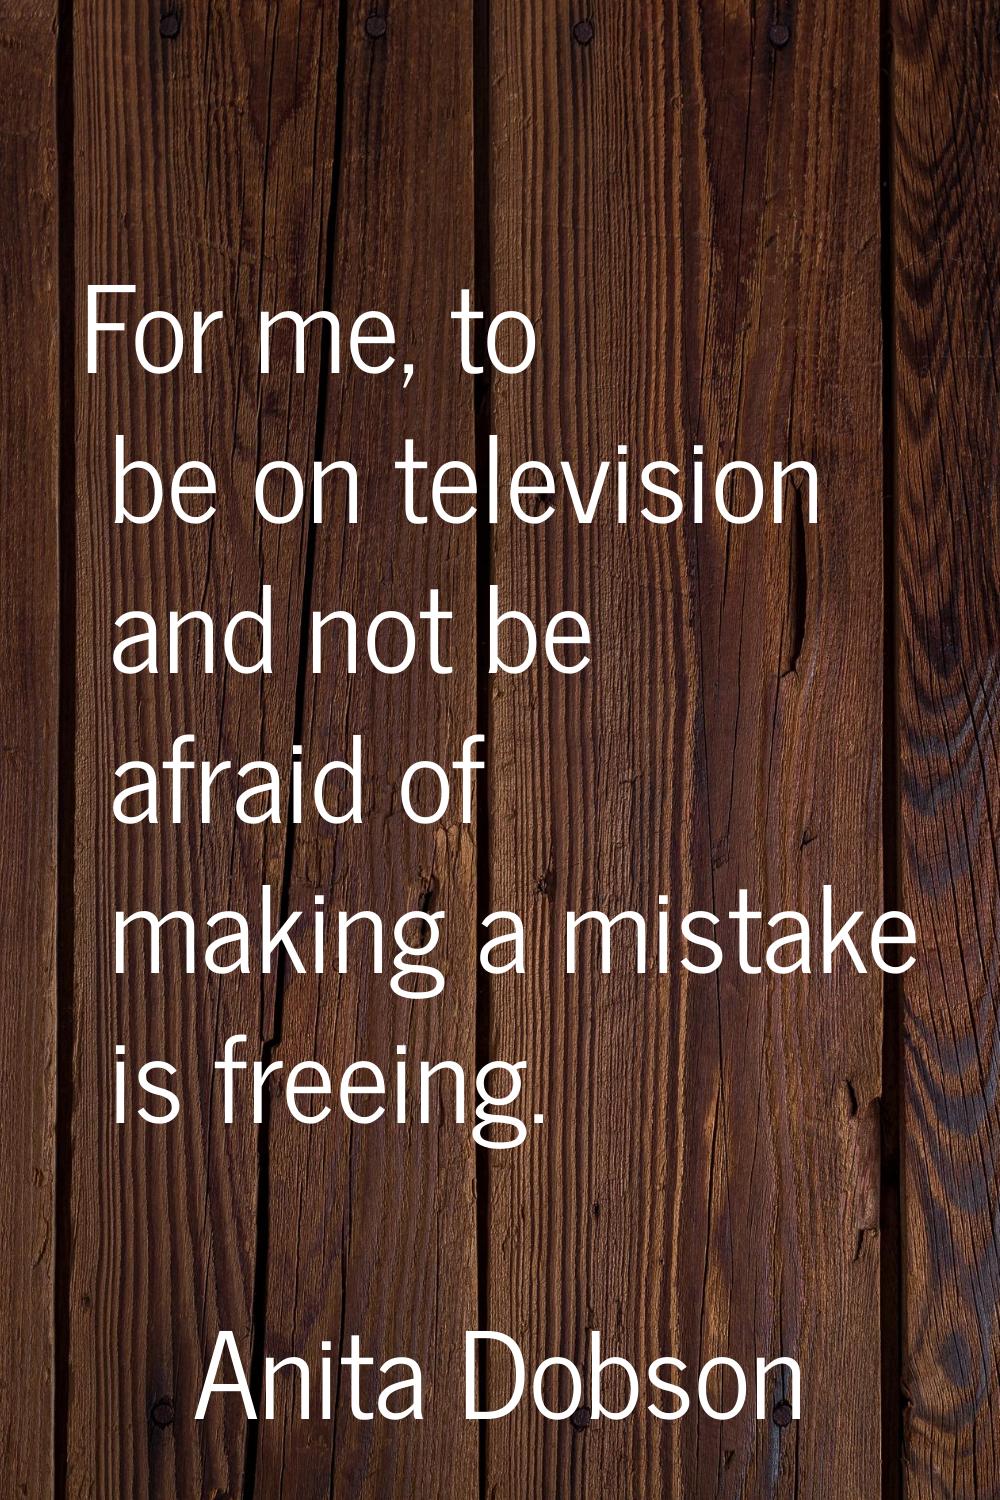 For me, to be on television and not be afraid of making a mistake is freeing.